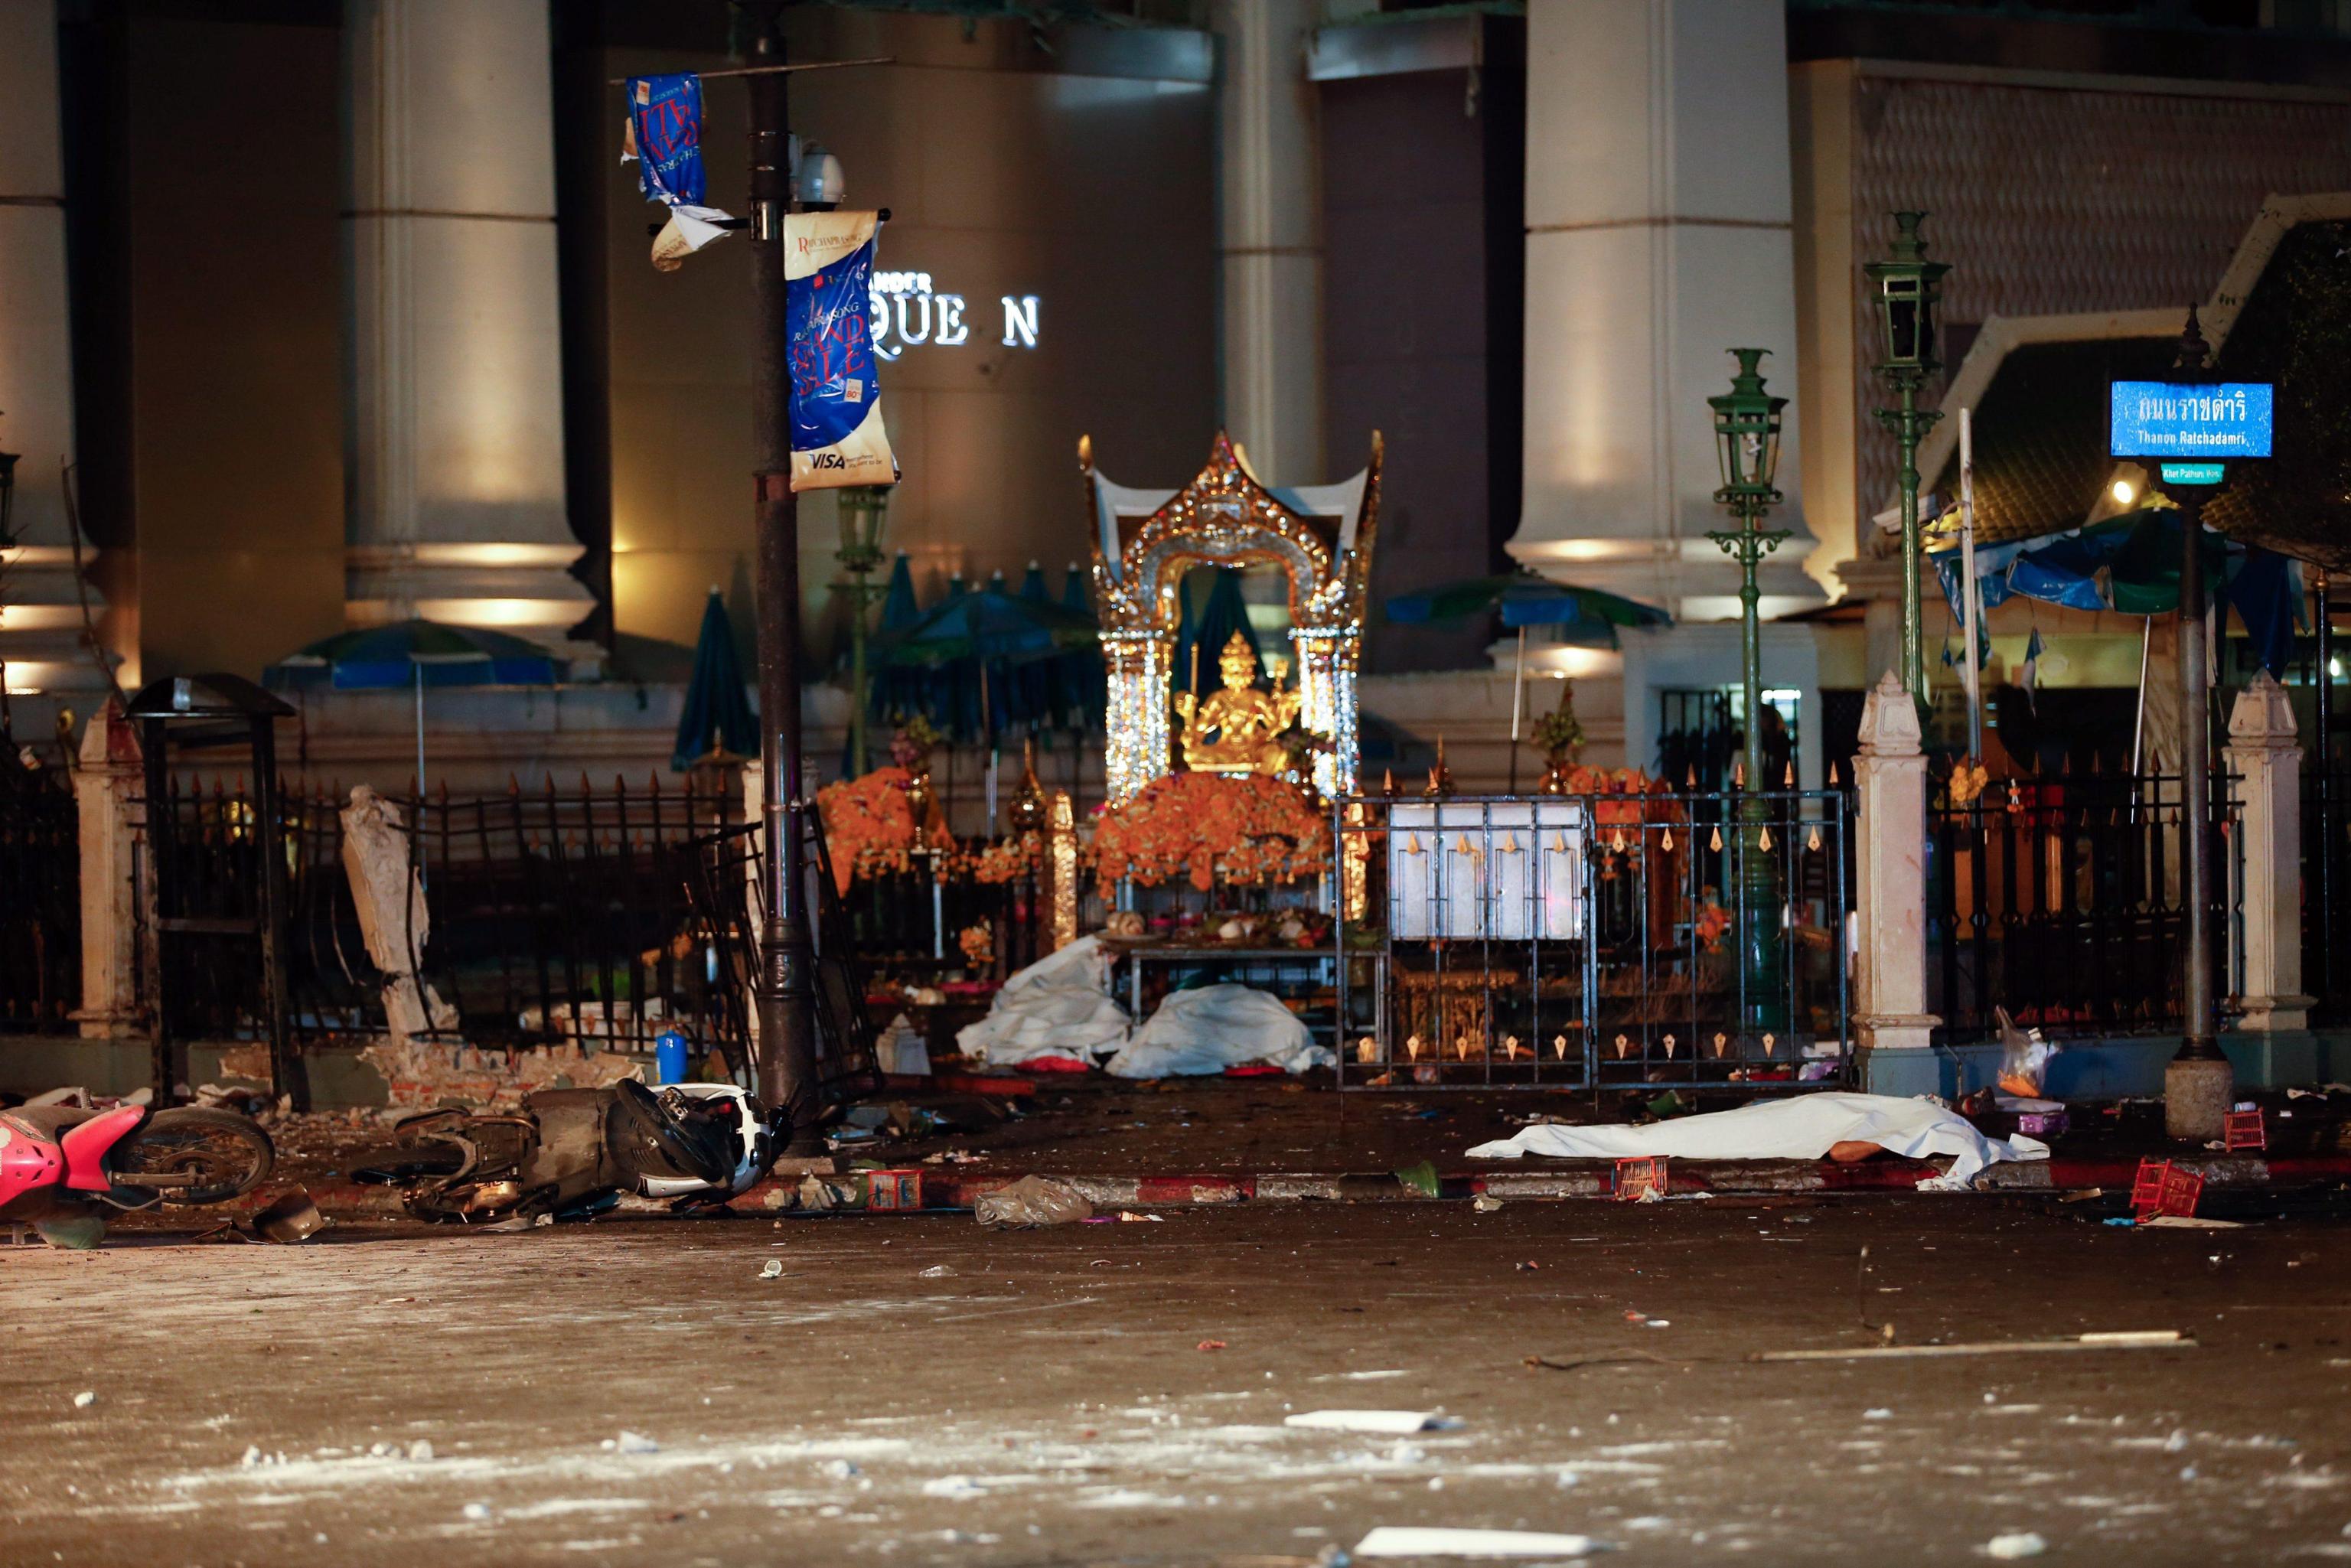 A body lies covered on the ground at the scene of a bomb attack near Erawan Shrine